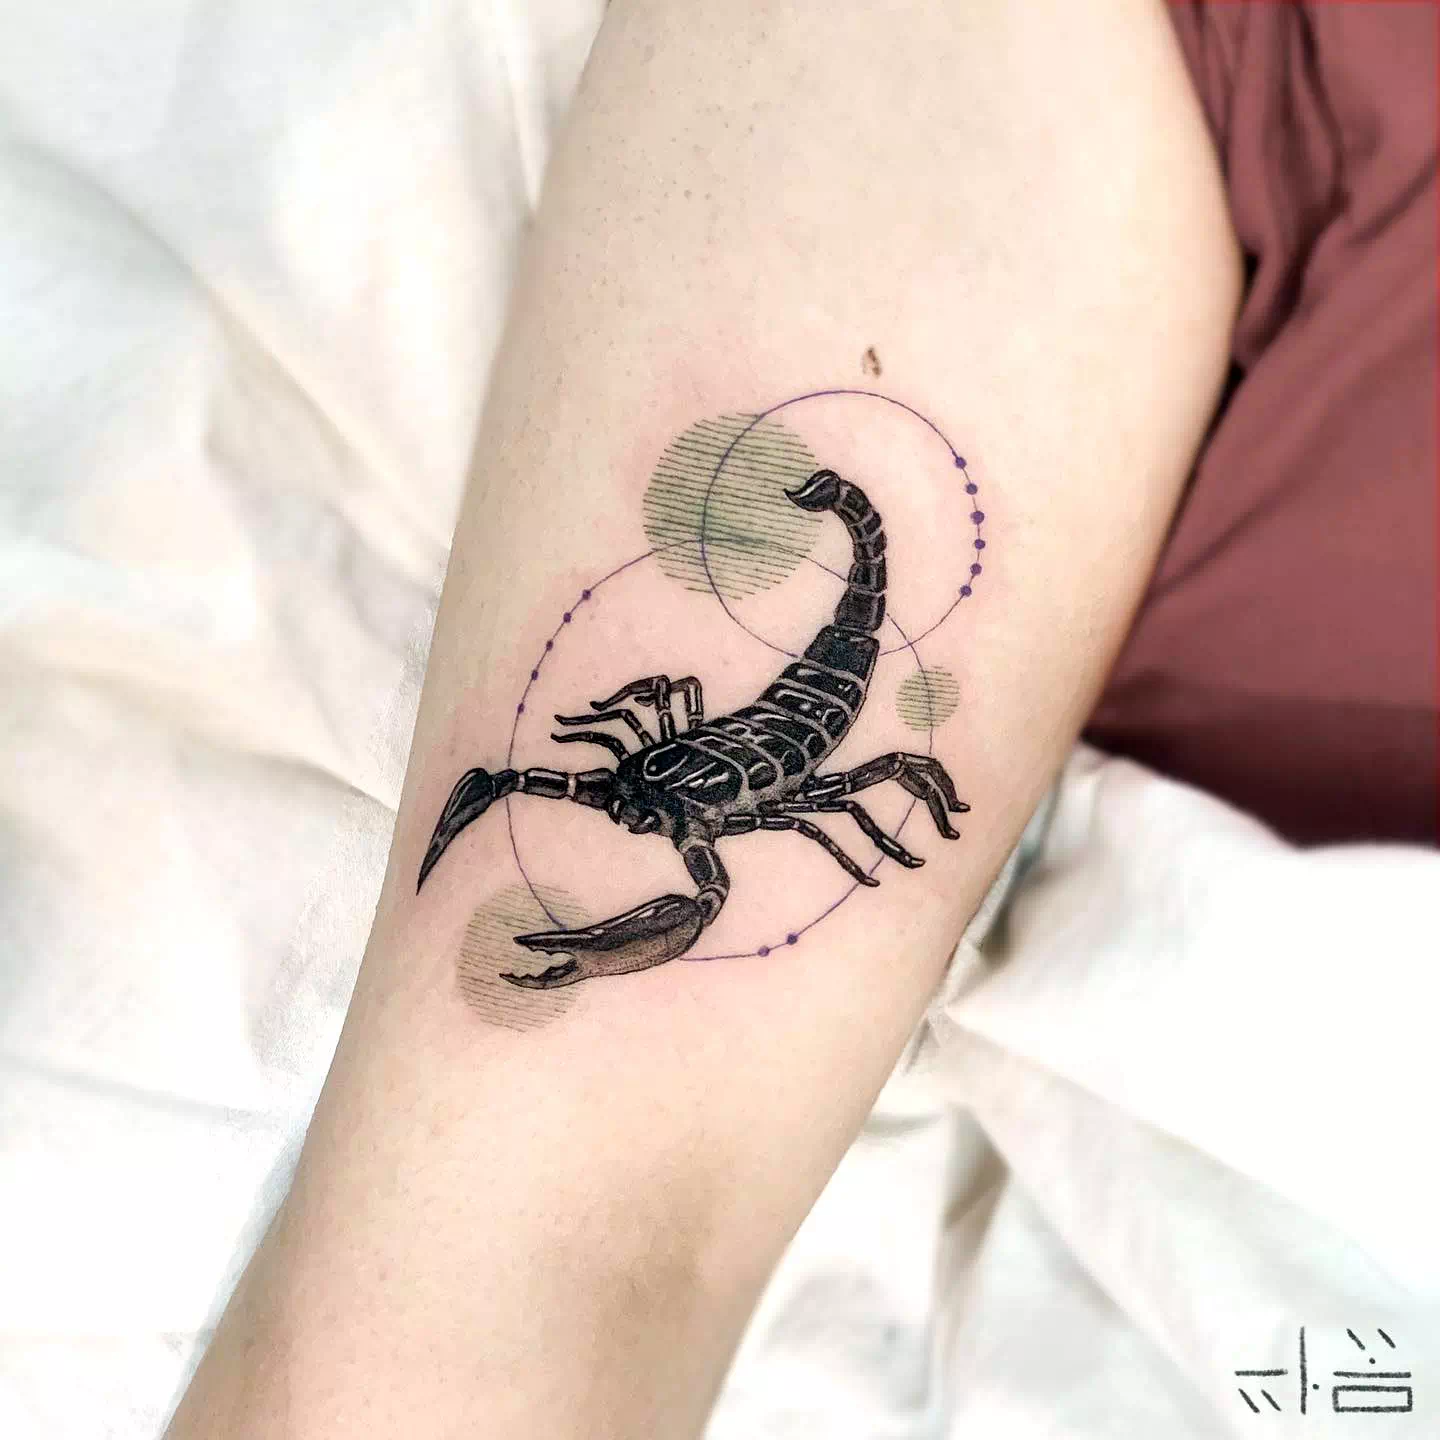 Scorpion Tattoos Images Over Arm 2